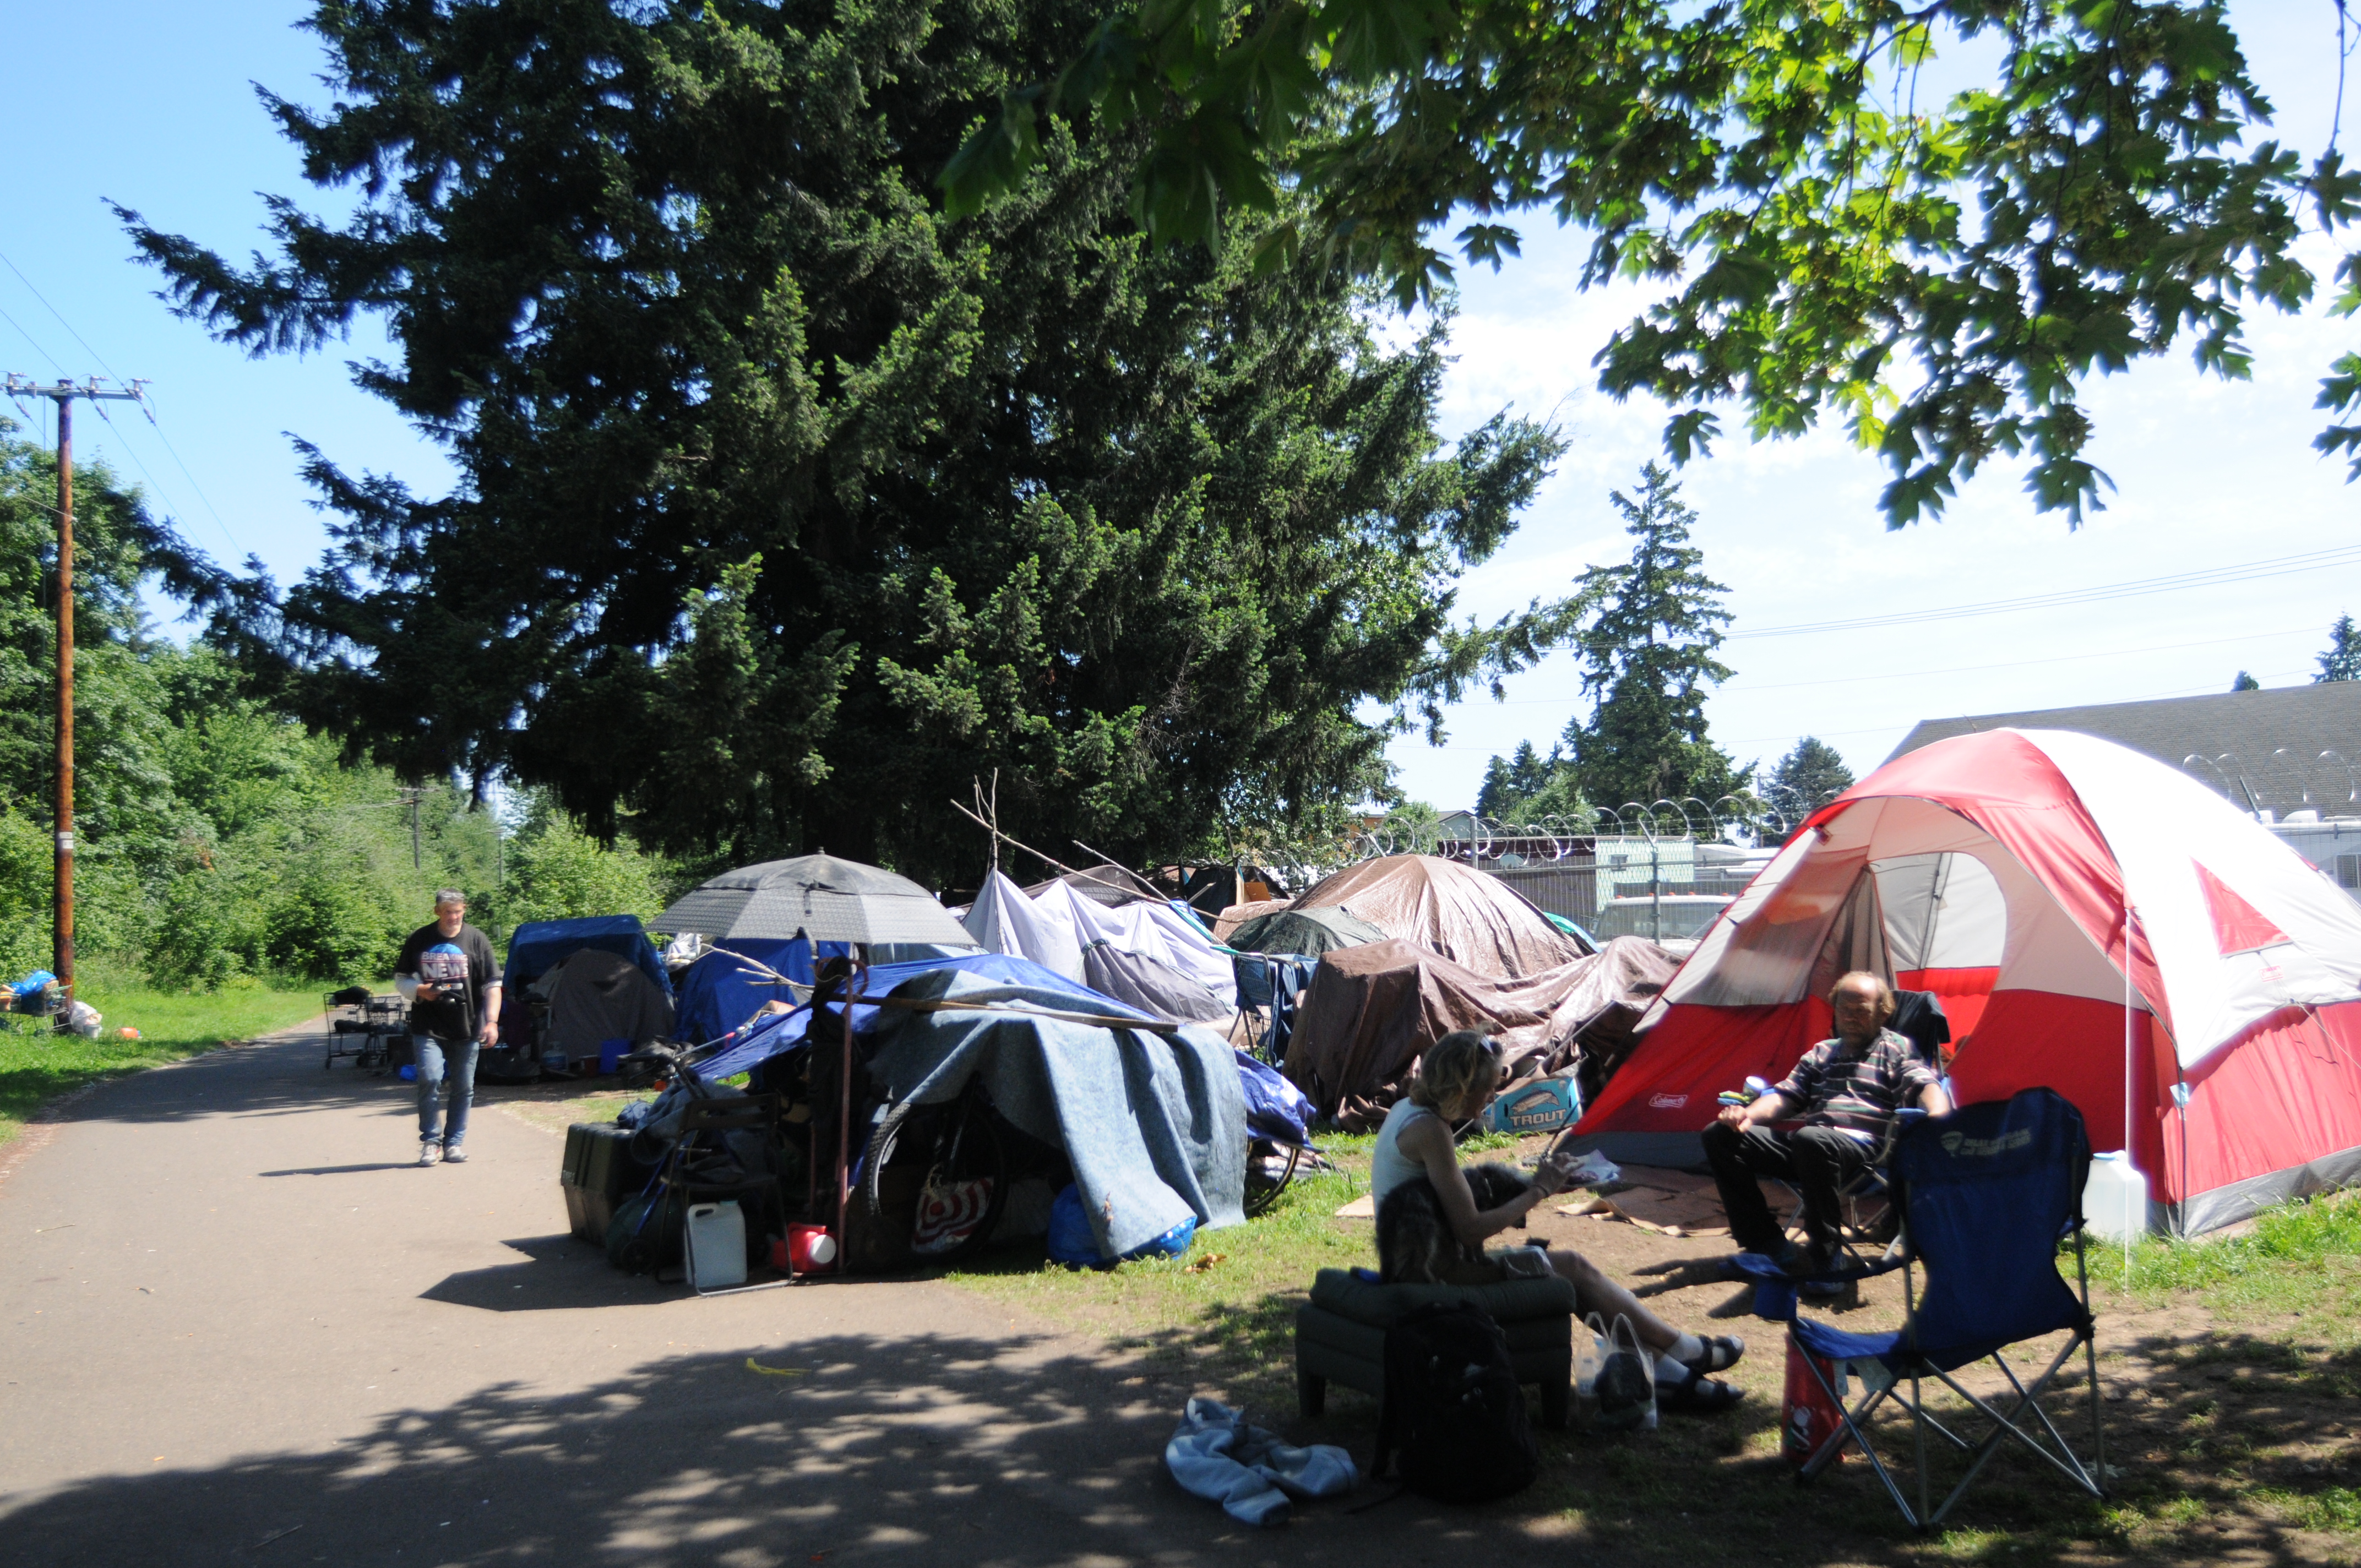 Portland S Downtown Homeless Community Increasingly Caught In